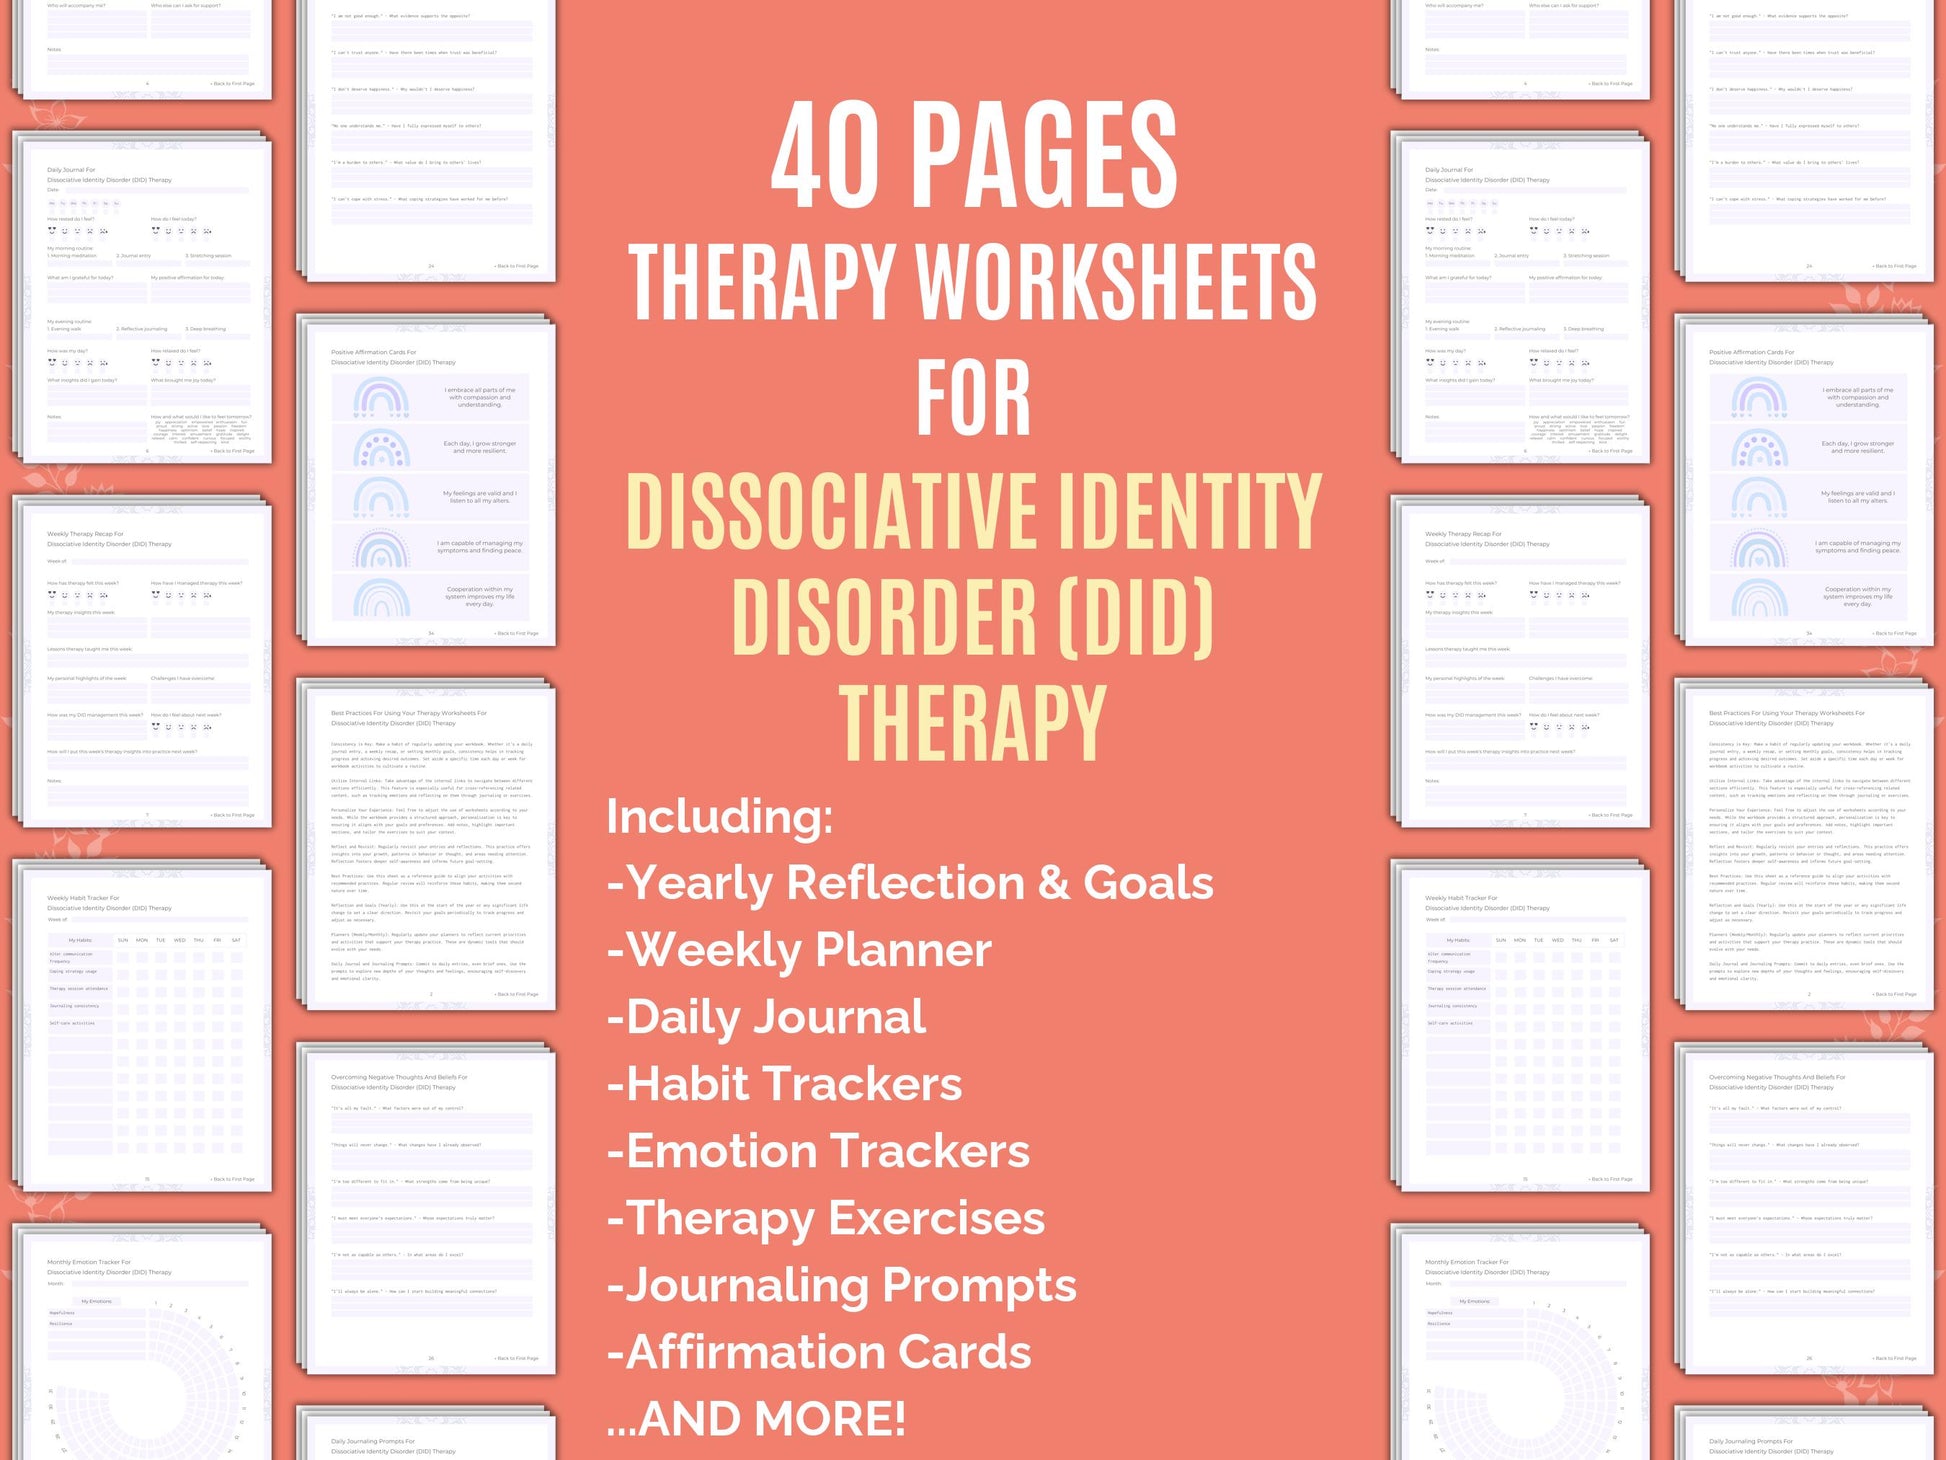 DID Templates, DID Workbooks, Dissociative, DID Resources, DID Notes, DID Planners, DID Counseling, Identity, Disorder, DID Tools, DID Goal Setting, DID Cheat Sheet, DID Therapy, DID Journaling, DID Journals